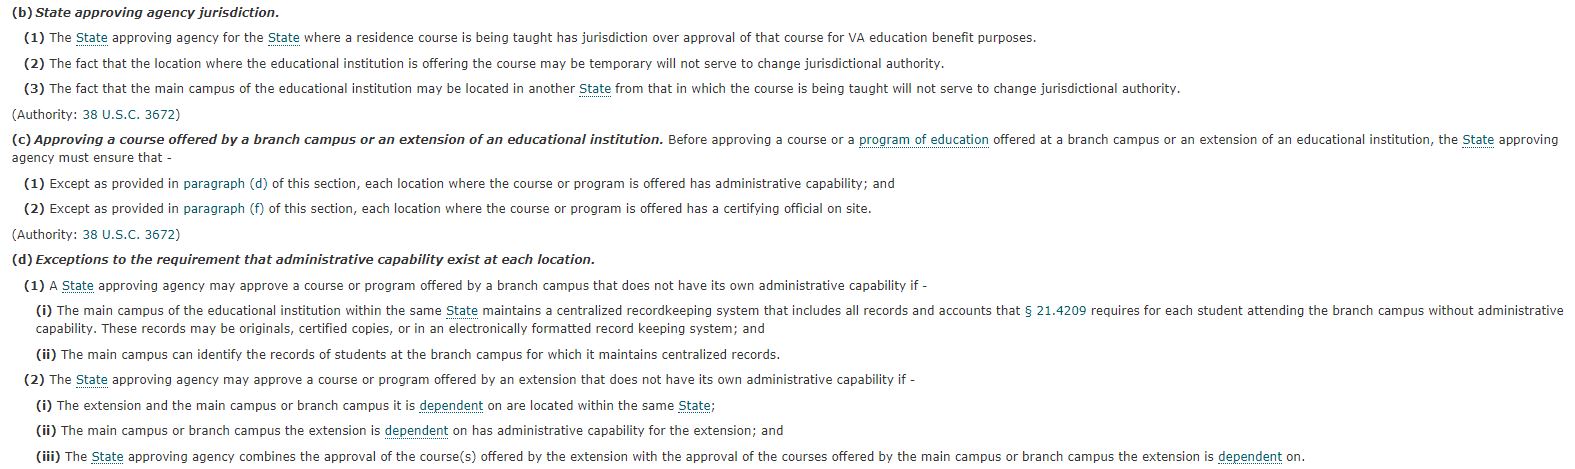 (b) State approving agency jurisdiction. (1) The state approving agency for the state where a residence course is being taught has jurisdiction over approval of that course for VA education benefit purposes. (2) The fact that the location where the educational institute is offering the course may be temporary will not serve to change jurisdictional authority. (3) The fact that the main campus of the educational institution may be located in another state from that in which the course is being taught will not serve to change jurisdictional authority. Authority: 38 U.S.C. 3672 (c) Approving a course offered by a branch campus or an extension of an educational institution. Before approving a course or a program of education offered at a branch campus or an extension of an educational institution, the state approving agency must ensure that (1) Except as provided in paragraph (d) of this section, each location where the course or program is offered has administrative capability; and (2) Except as provided in paragraph (f) of this section, each location where the course or program is offered has a certifying official on site. Authority: 38 U.S.C. 3672 (d) Exceptions to the requirement that administrative capability exist at each location. (1) A state approving agency may approve a course or program offered by a branch campus that does not have its own administrative capability if – (i) The main campus of the educational institution within the same state maintains a centralized recordkeeping system that includes all records and accounts that 21.4209 requires for each student attending the branch campus without administrative capability. These records may be originals, certified copies, or in an electronically formatted record keeping system; and (ii) The main campus can identify the records of students at the branch campus for which it maintains centralized records. (2) The state approving agency may approve a course or program offered by an extension that does not have its own administrative capability if – (i) The extension and the main campus or branch campus it is dependent on are located within the same state; (ii) The main campus or branch campus the extension is dependent on has administrative capability for the extension; and (iii) The state approving agency combines the approval of the course(s) offered by the extension with the approval of the courses offered by the main campus or branch campus the extension is dependent on.